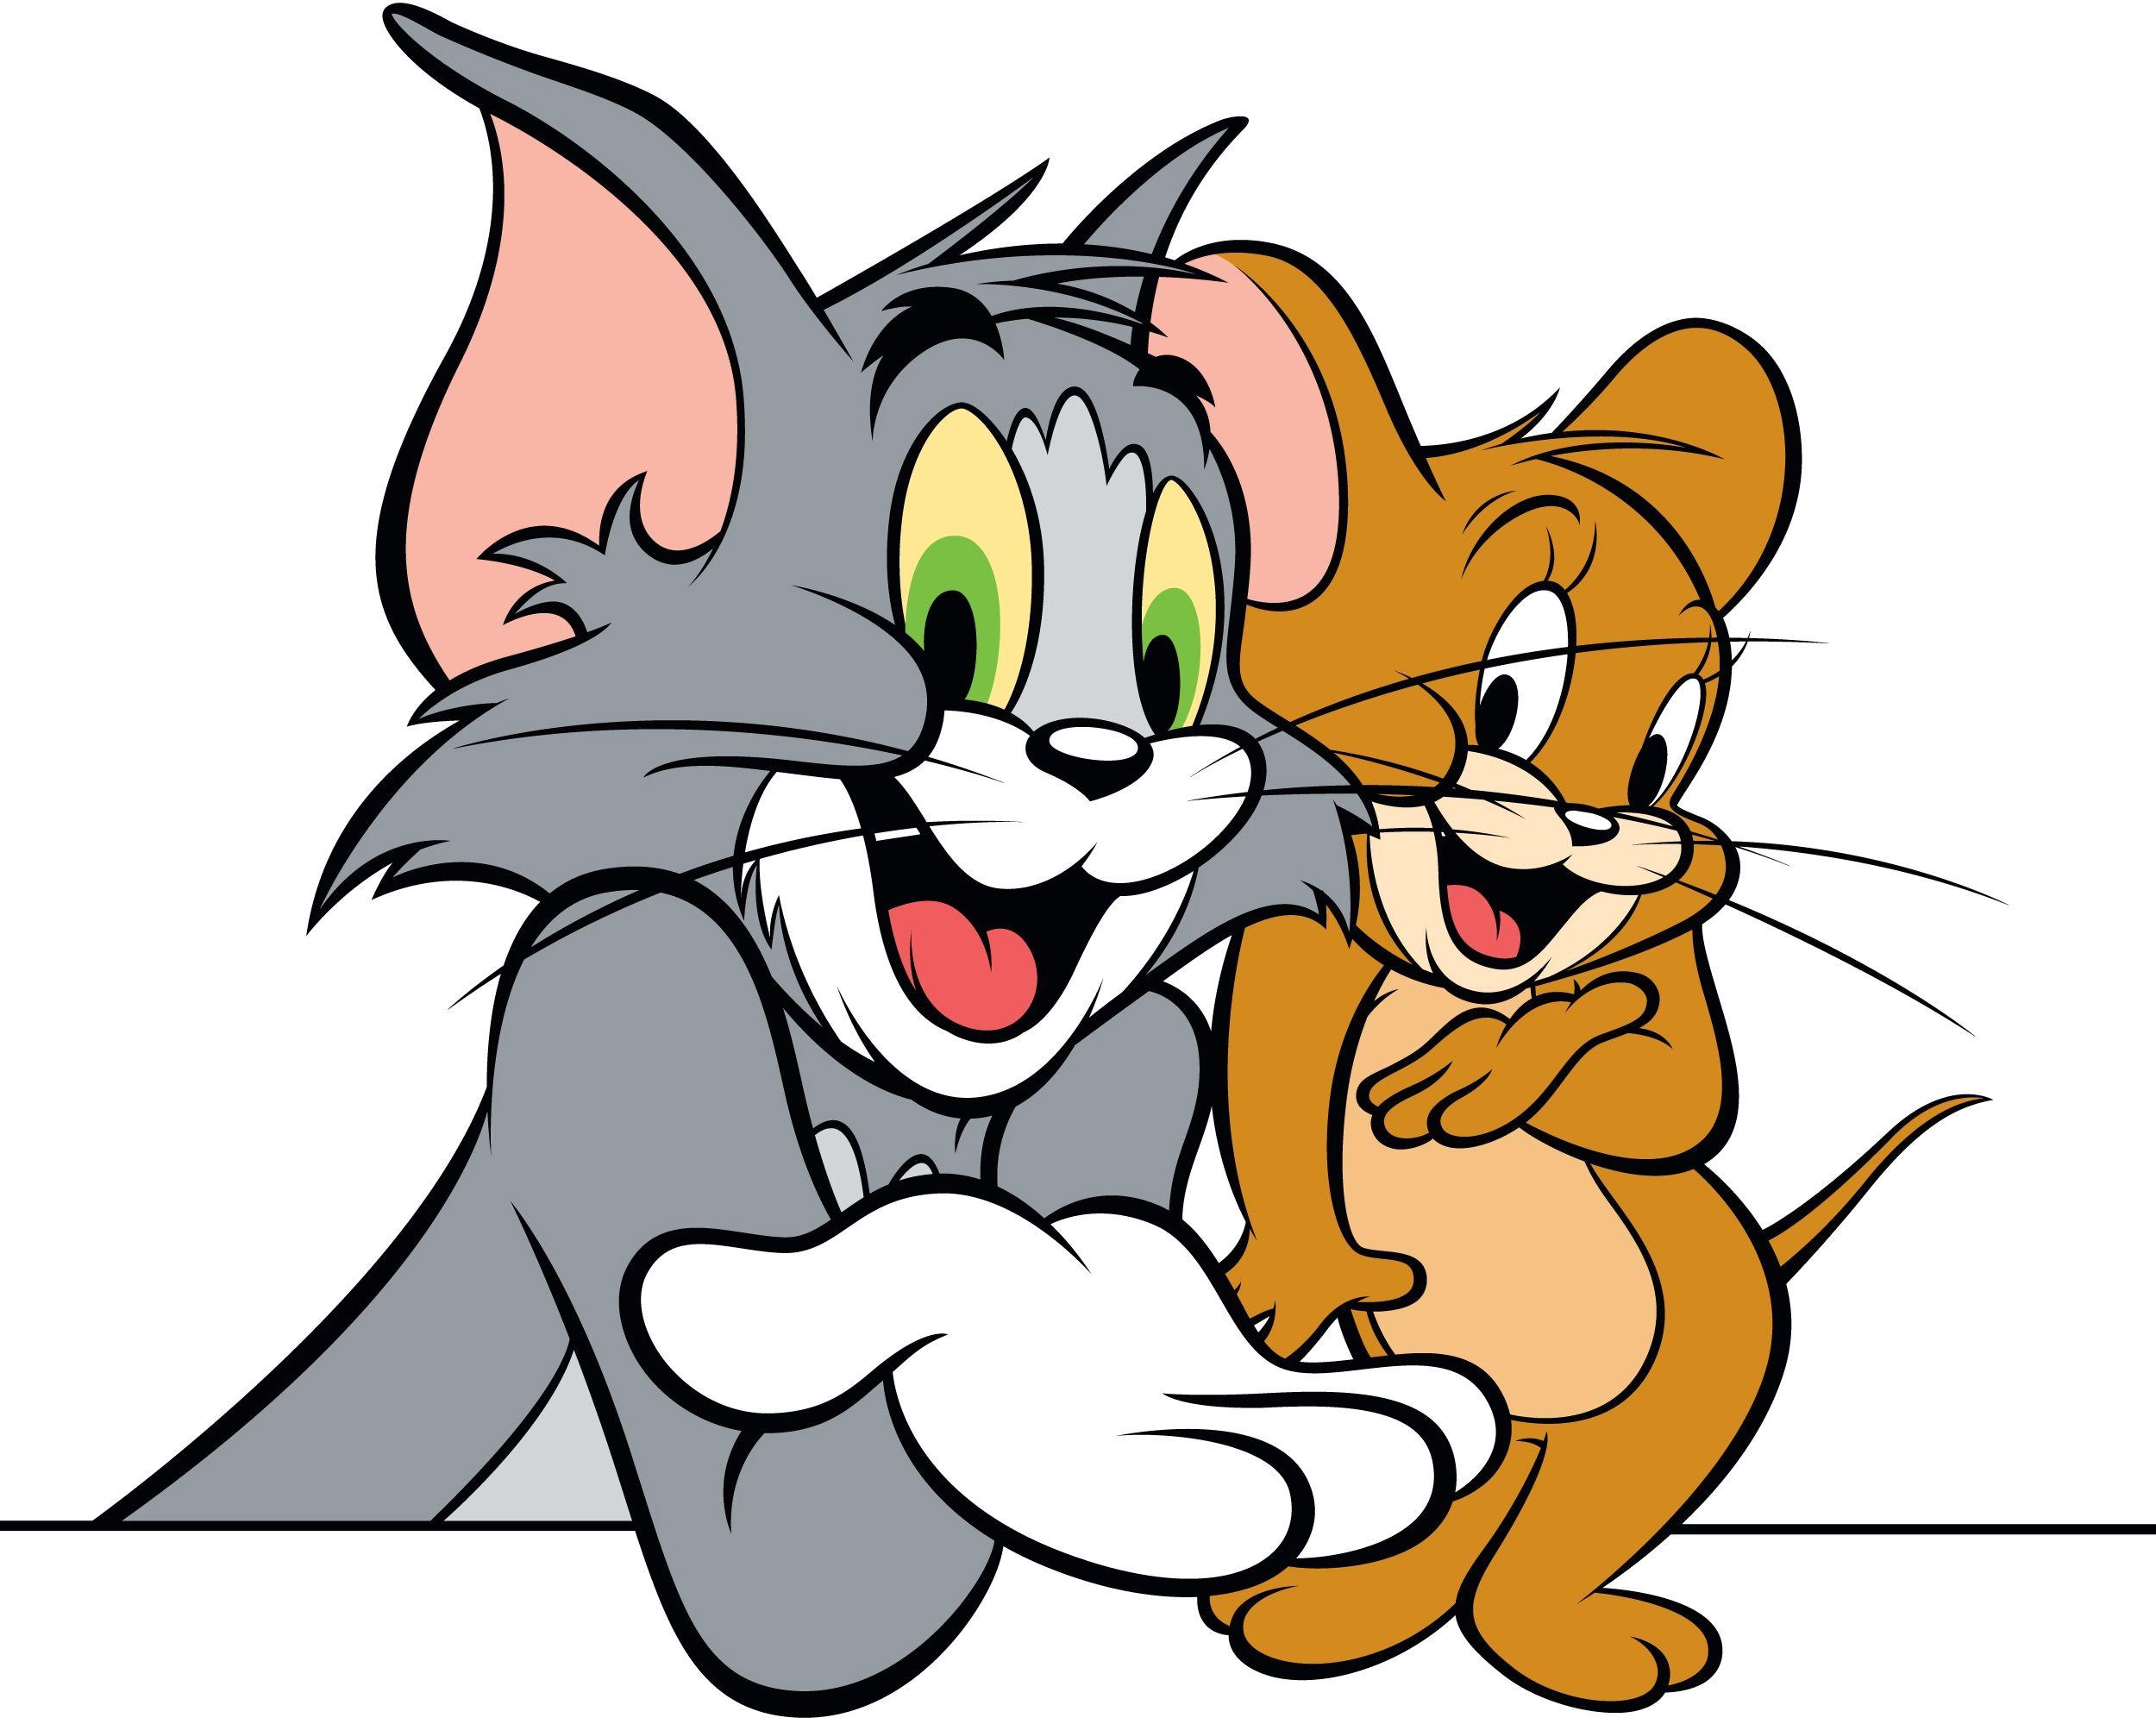 Tom And Jerry Movie Wallpapers - Wallpaper Cave